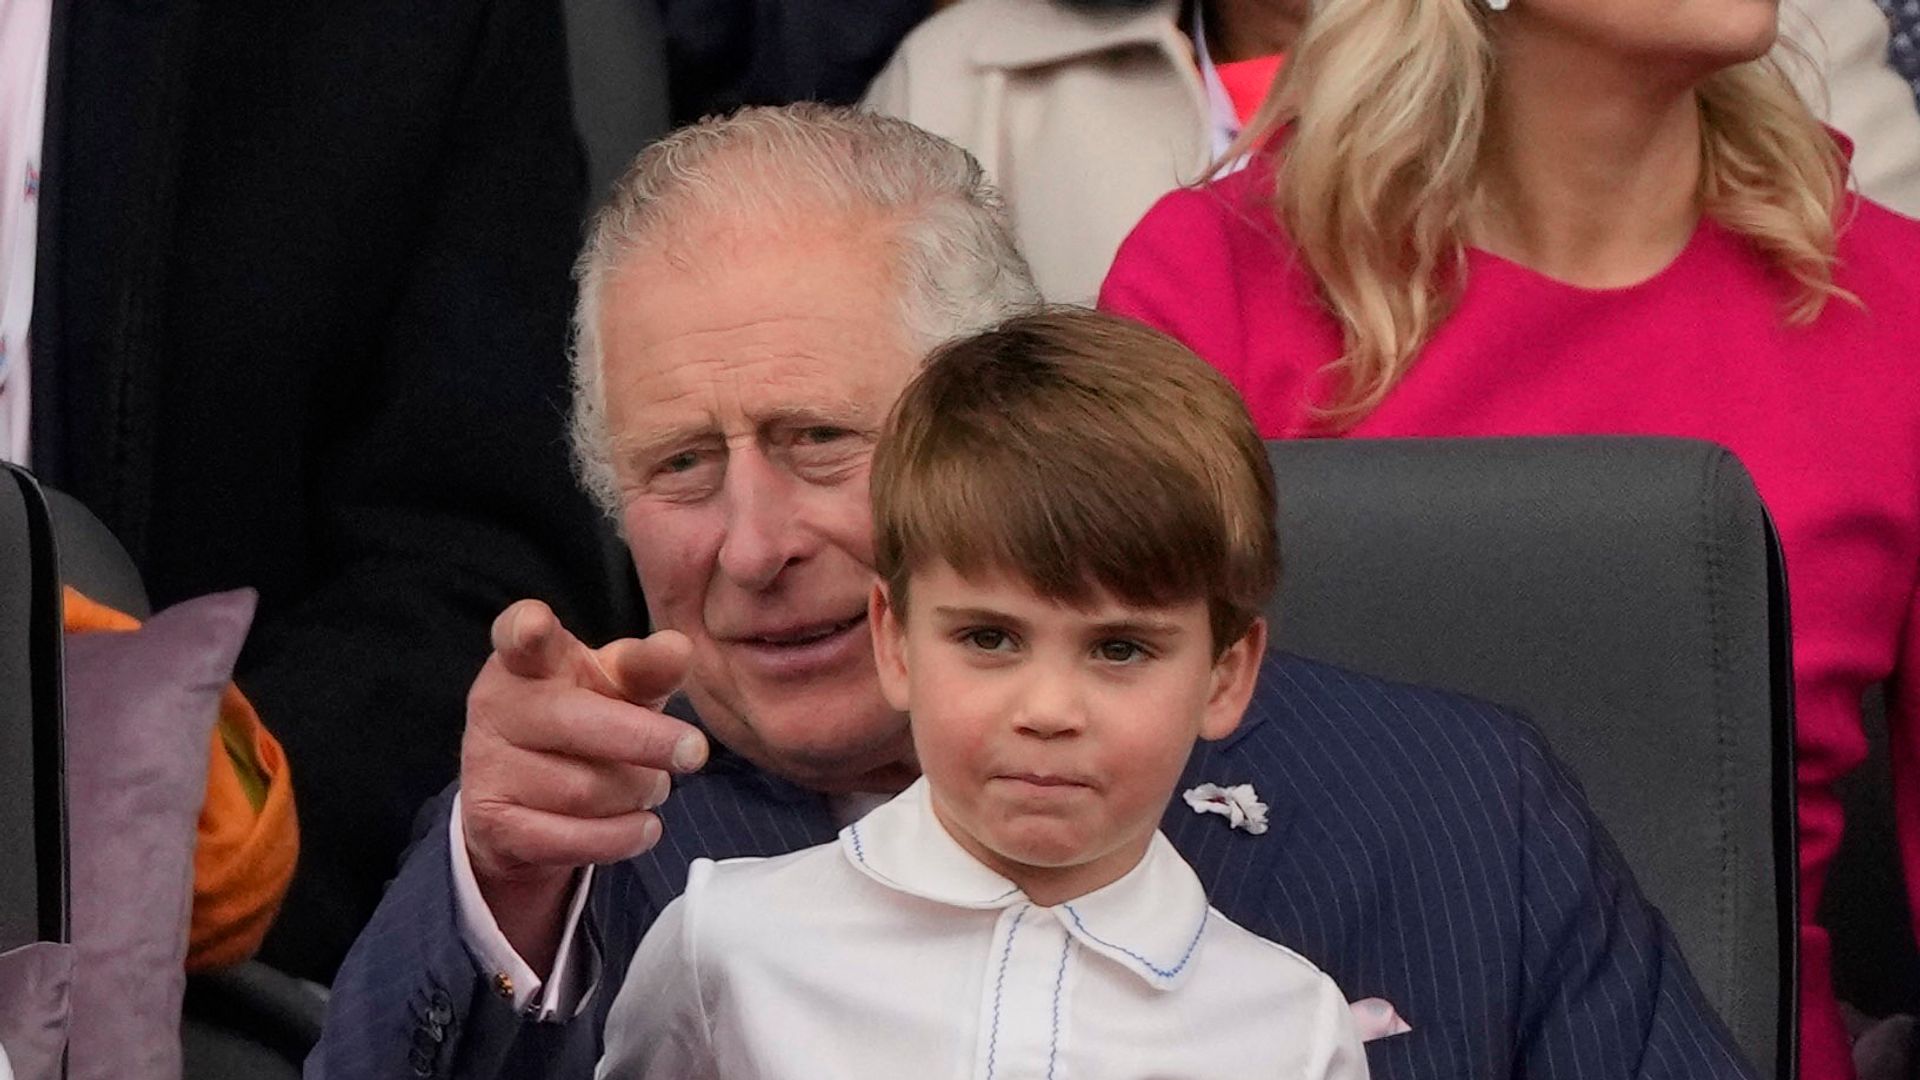 Prince Louis sits on grandpa Charles' lap at the Platinum Jubilee